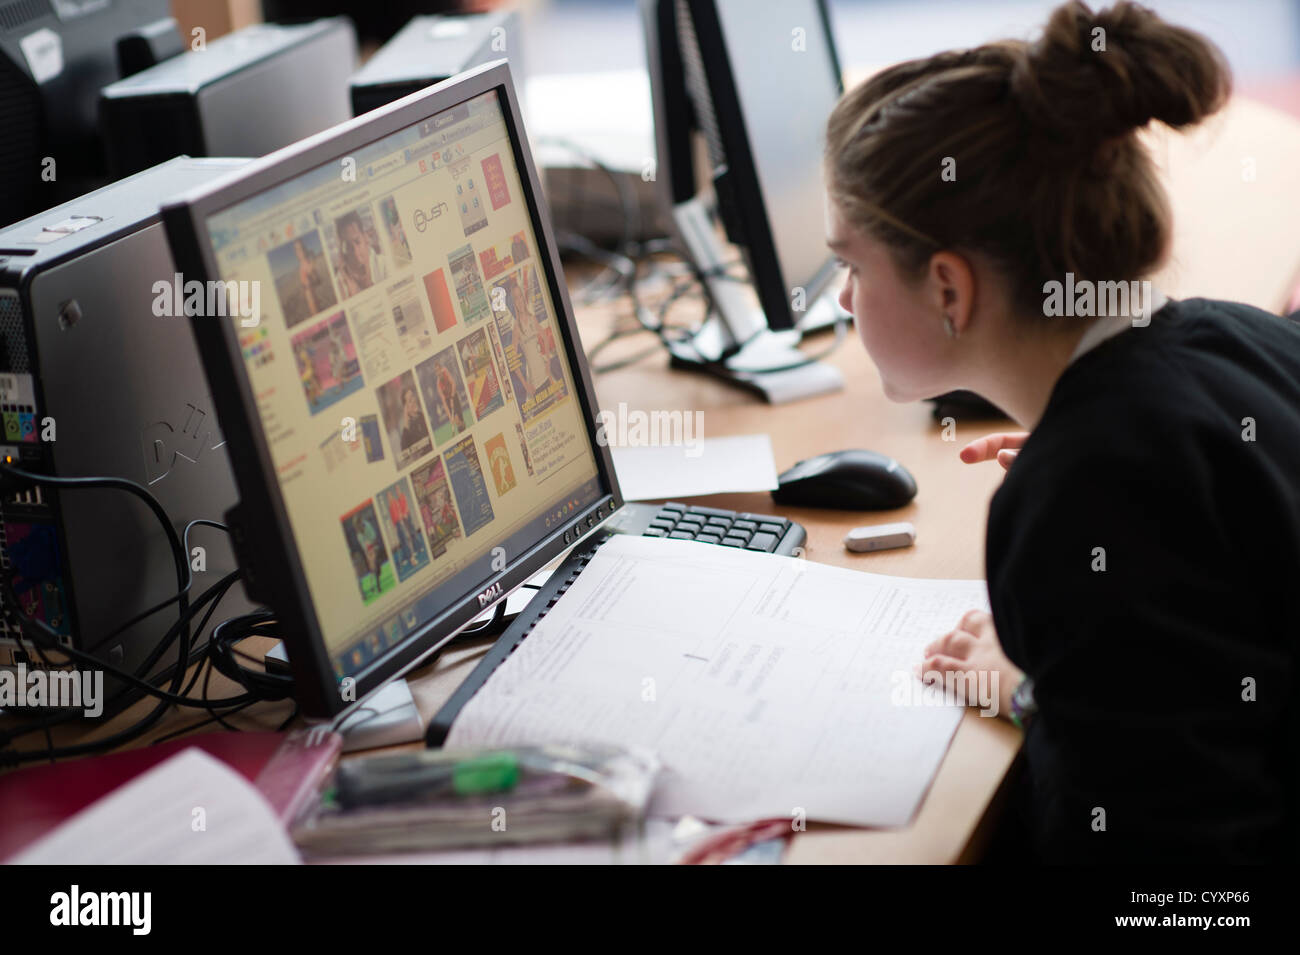 A girl  using information technology computers computing at a secondary comprehensive school, Wales UK Stock Photo